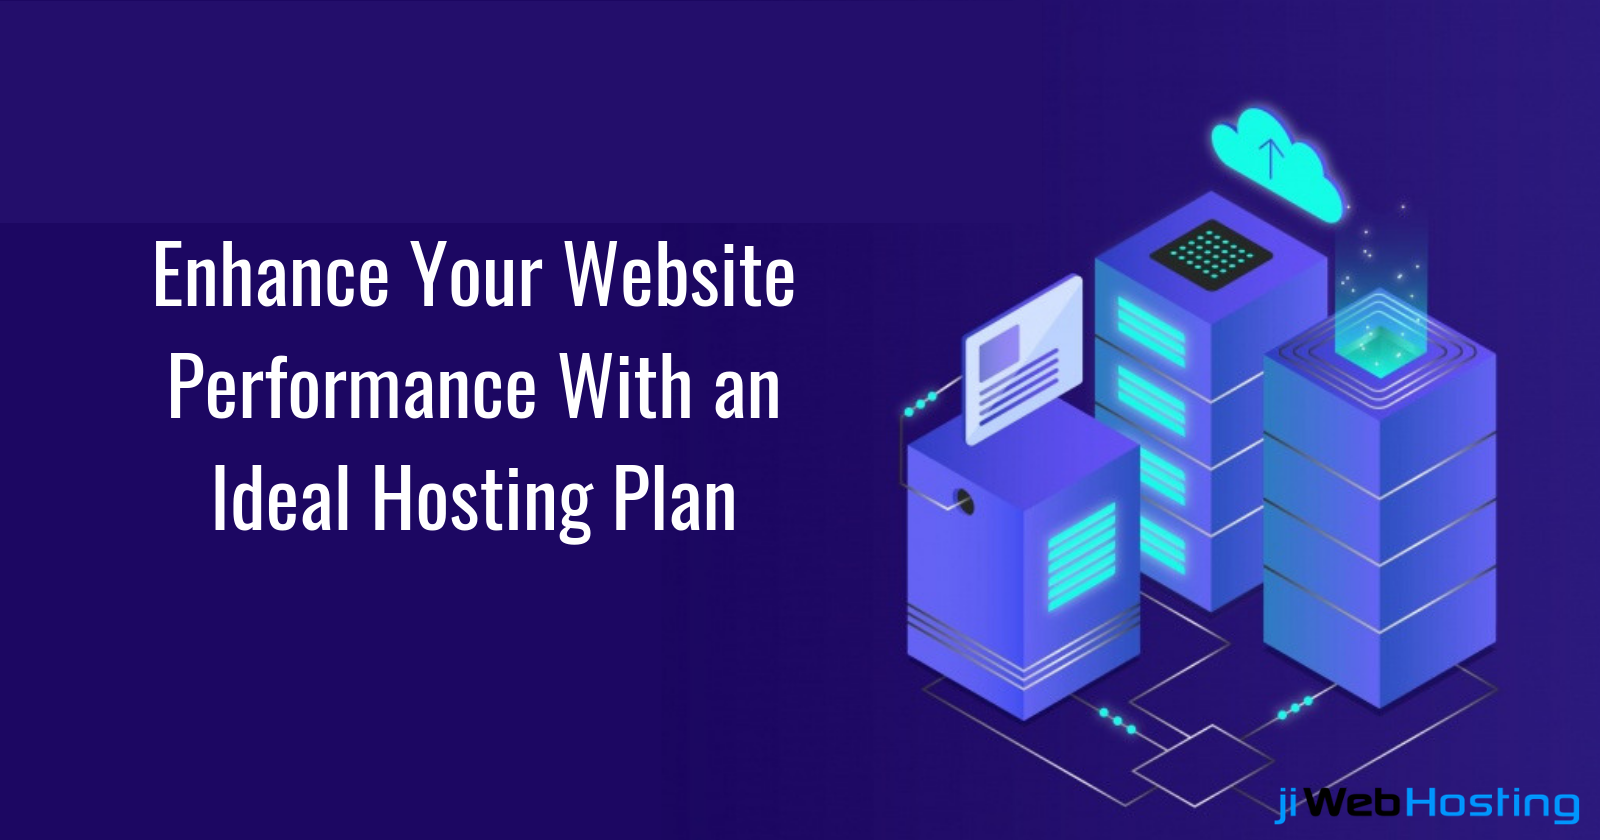 Enhance Your Website Performance With an Ideal Hosting Plan